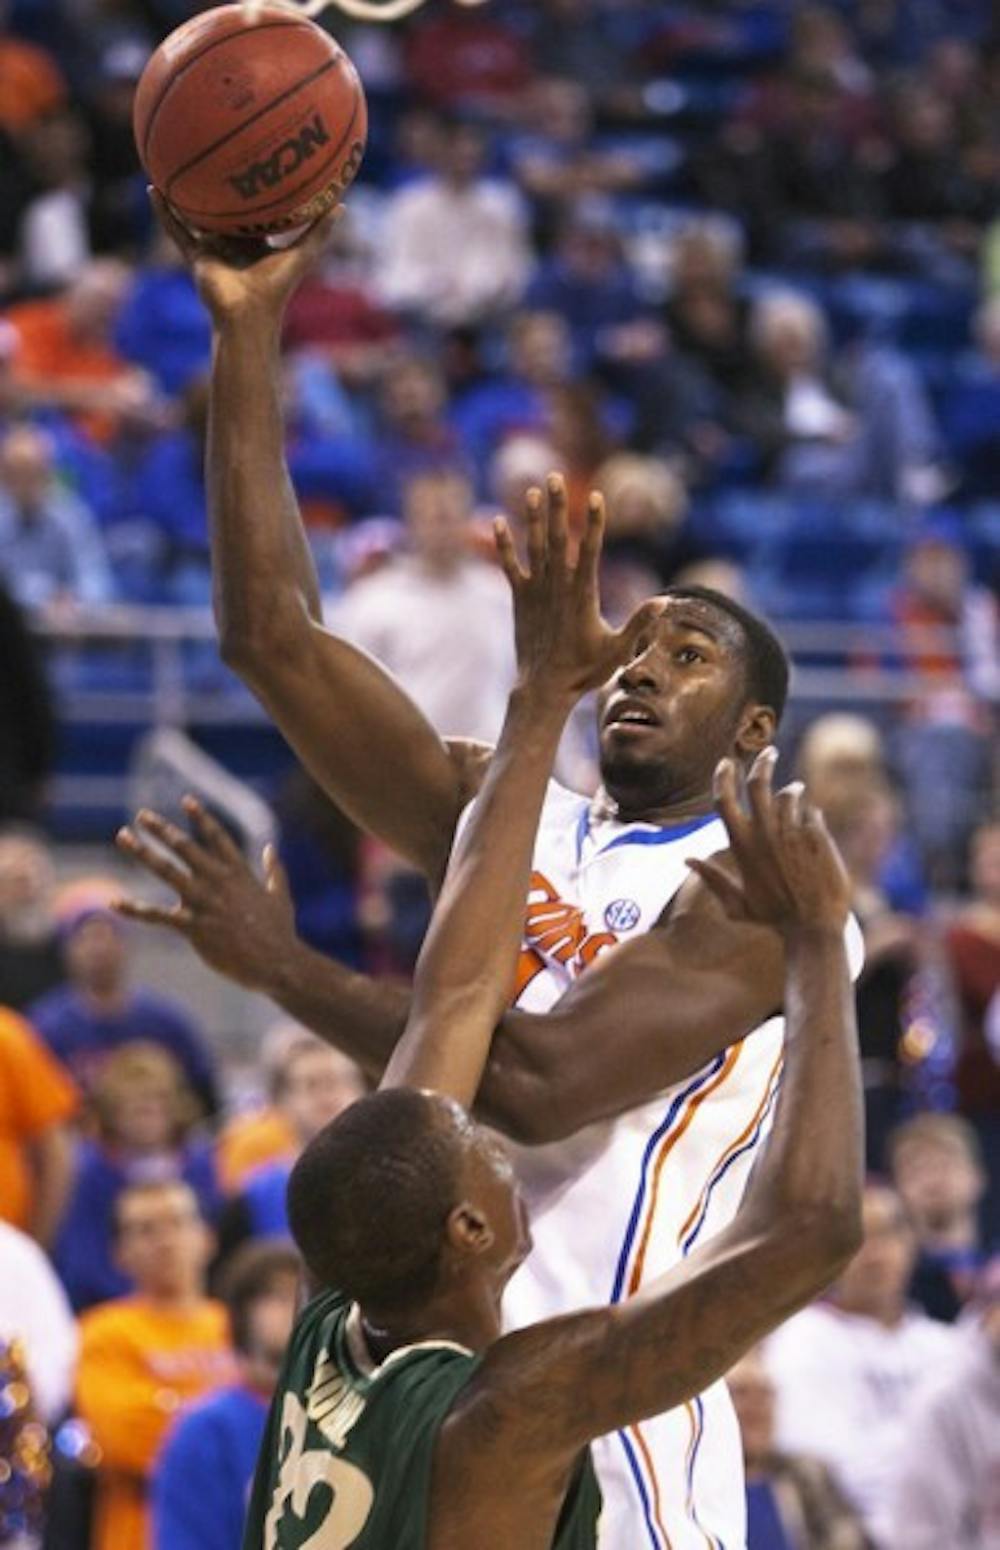 <p>Sophomore center Patric Young scored 15 points and hauled in seven rebounds on a night when the Gators were out-rebounded 36-34 by the Blazers.</p>